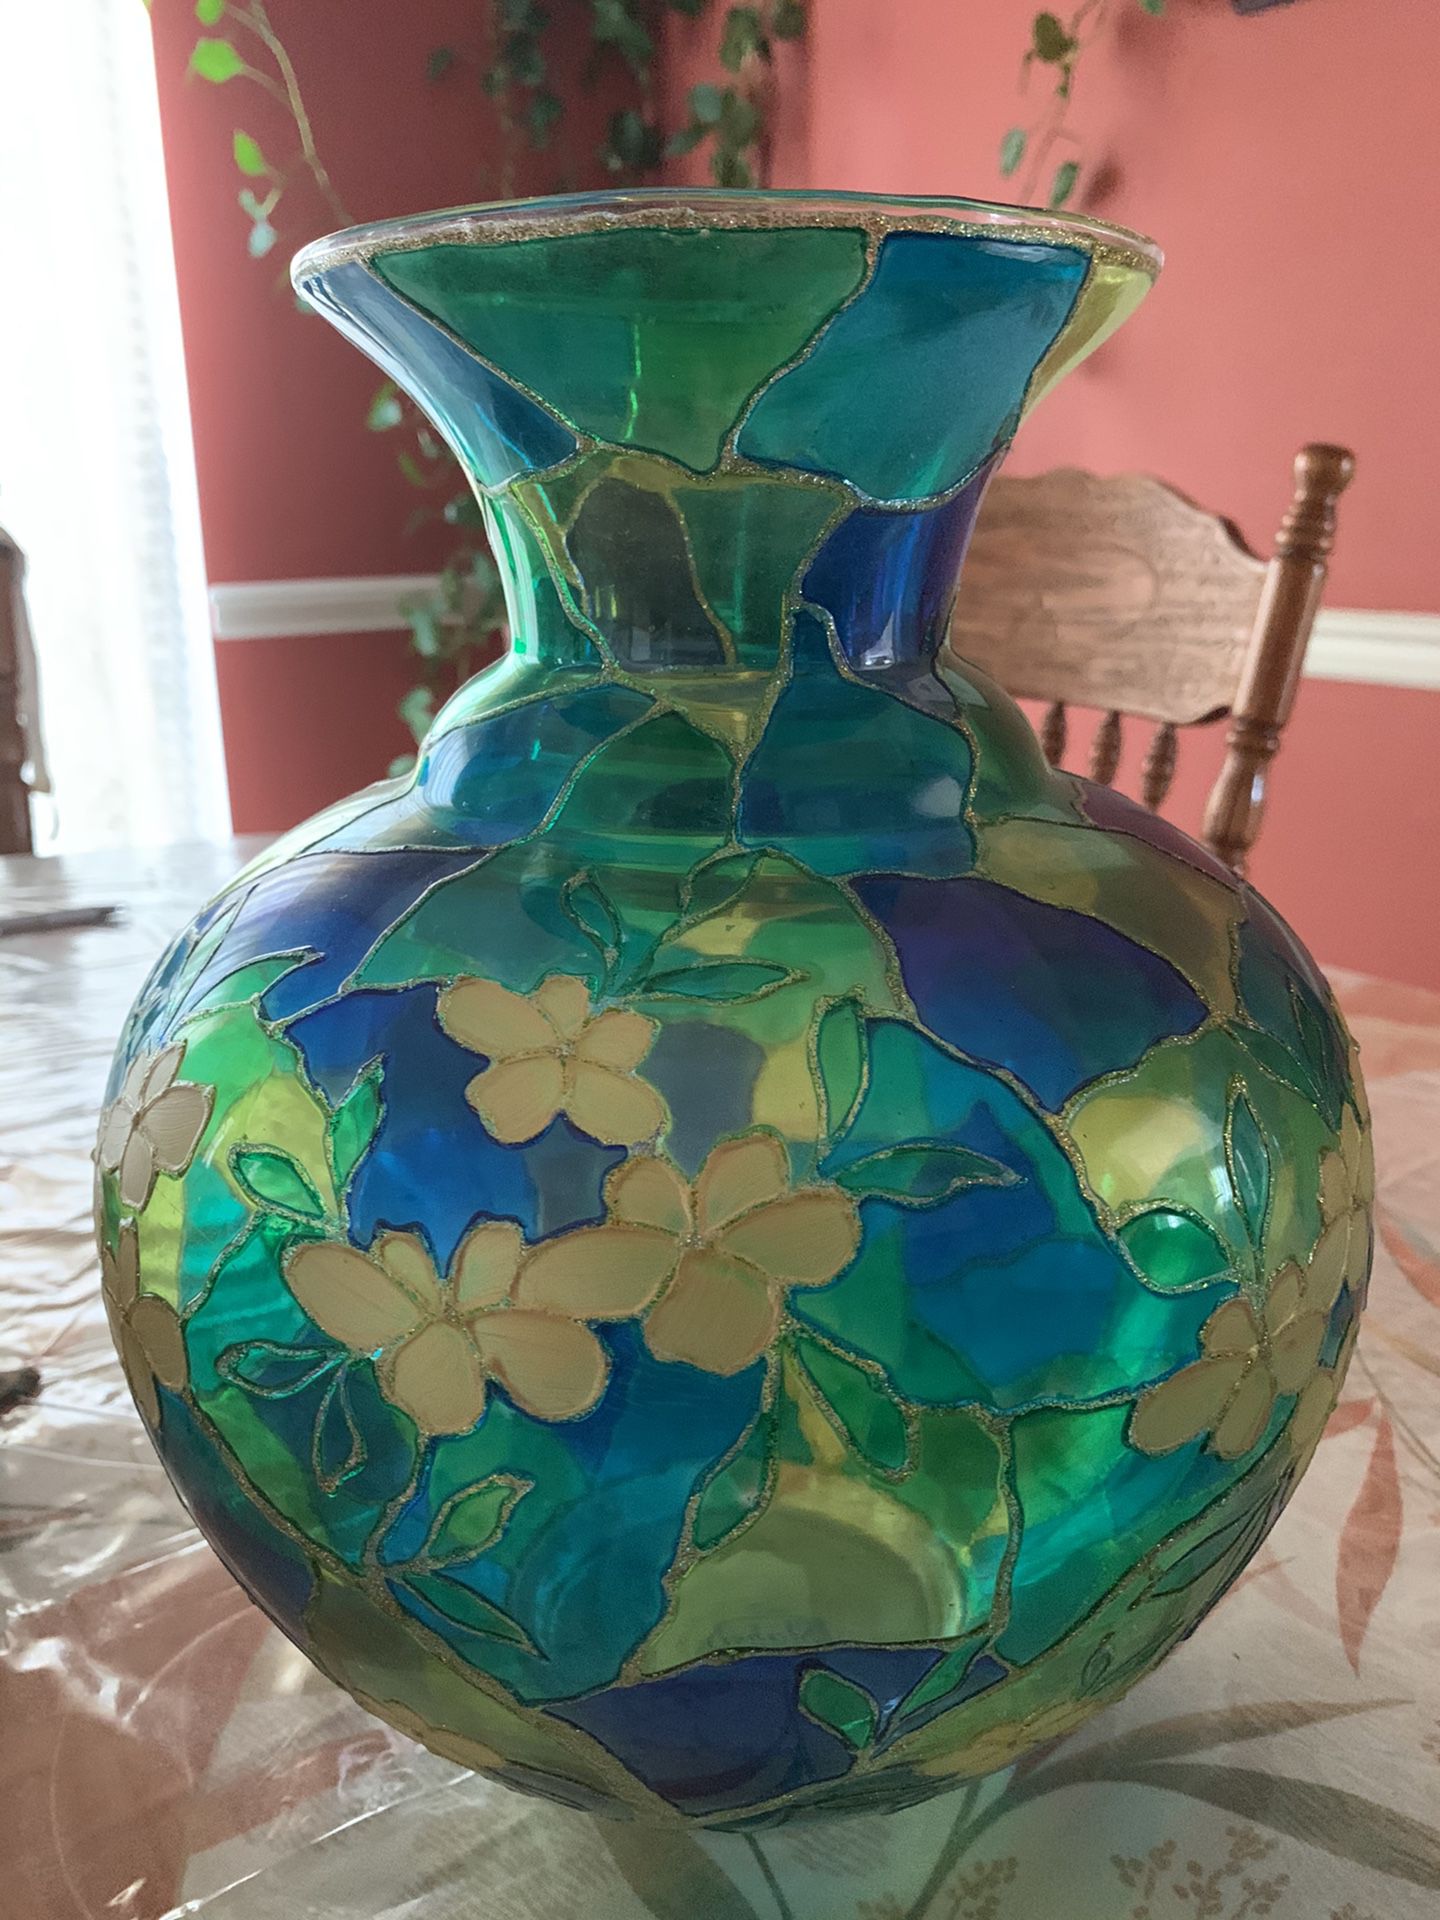 Price Reduced - One Beautiful Glass Flower Pot